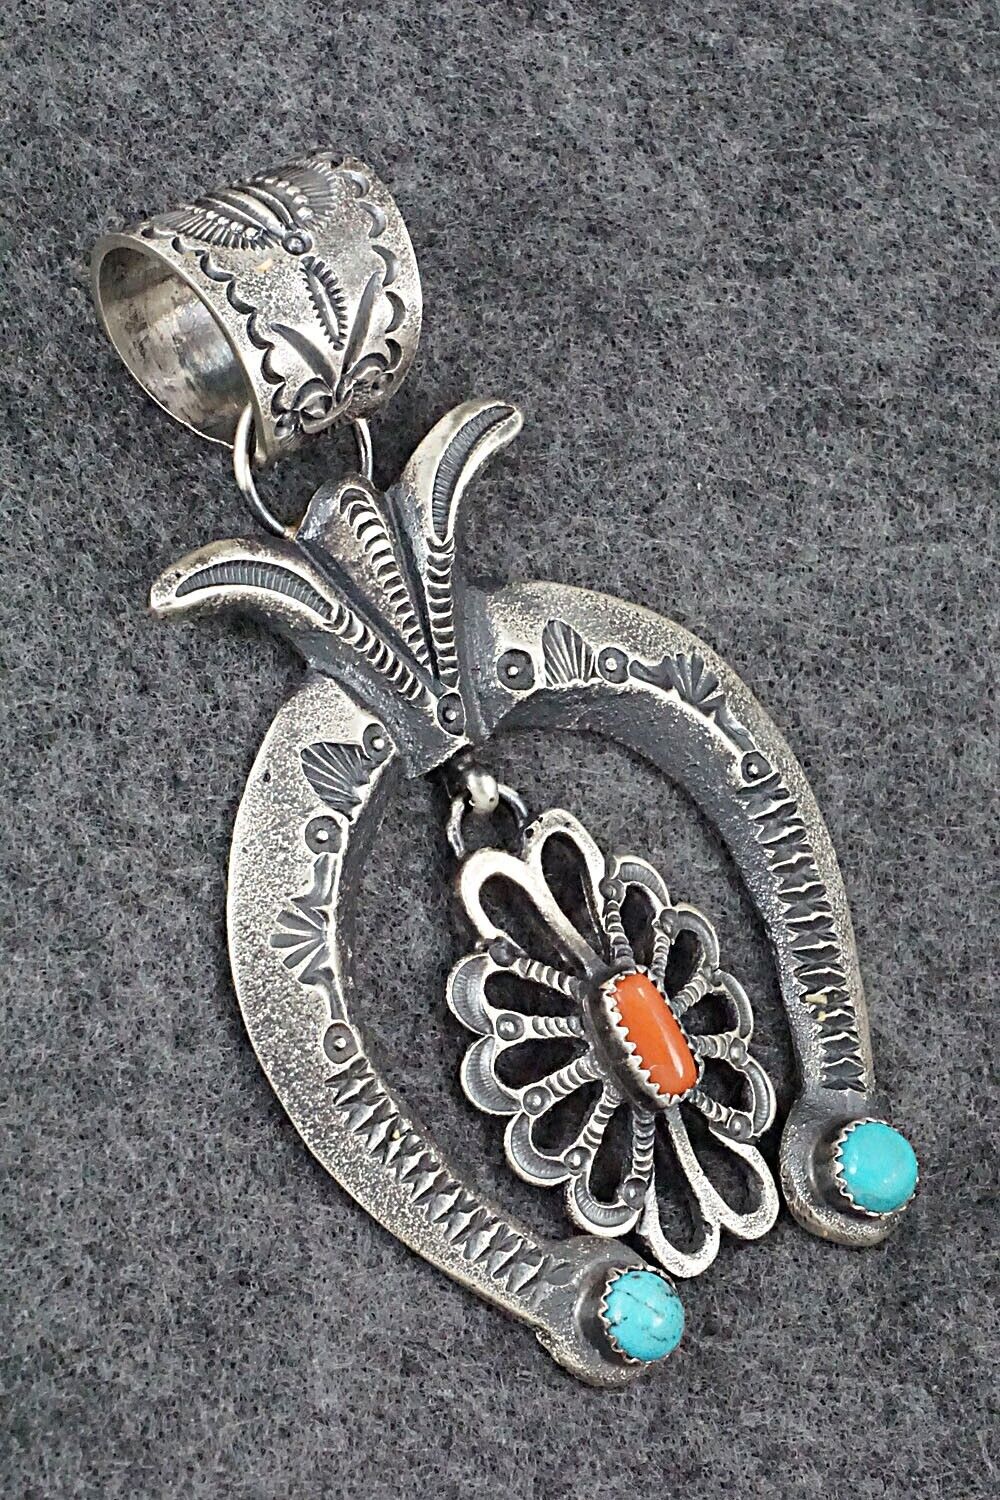 Turquoise, Coral and Sterling Silver Naja Pendant - Eva Cayatineto